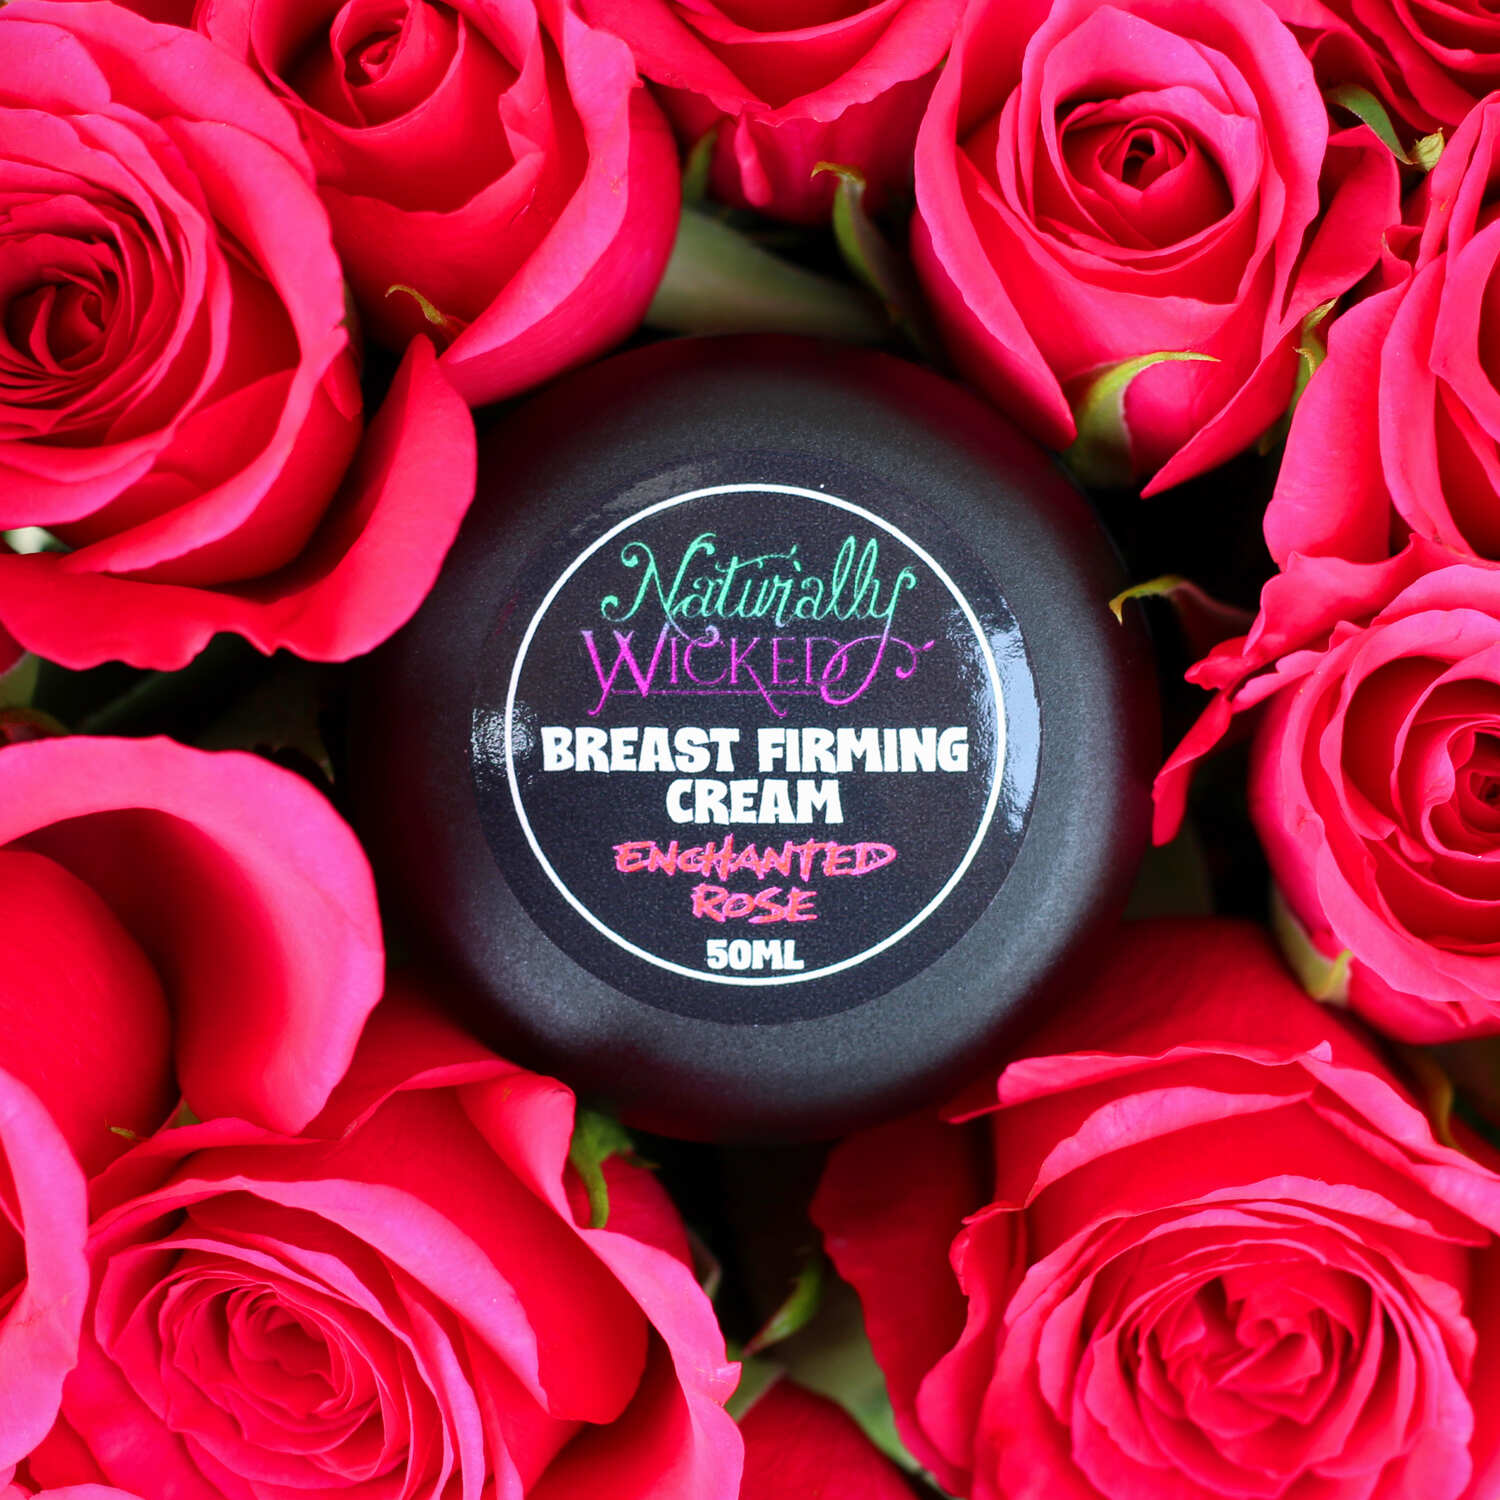 Naturally Wicked Enchanted Rose Breast Firming Cream Amongst A Trove Of Beautiful Pink Roses